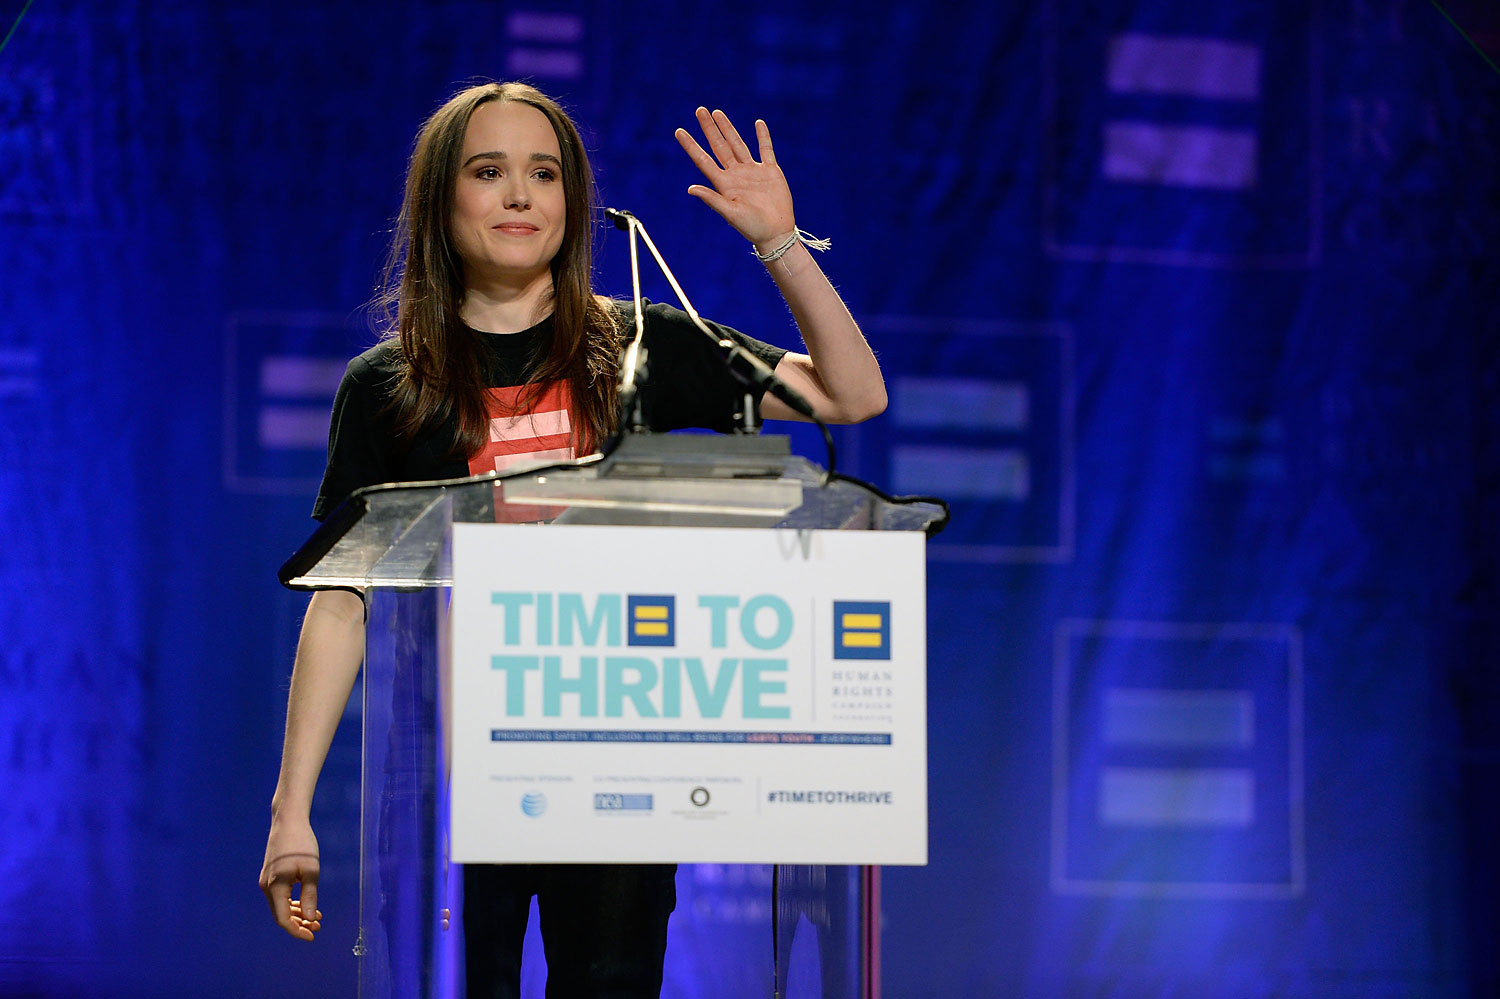 Actress Ellen Page comes out as gay at the Human Rights Campaign's Time to Thrive Conference, on Friday, February, 14, 2014 in Las Vegas.